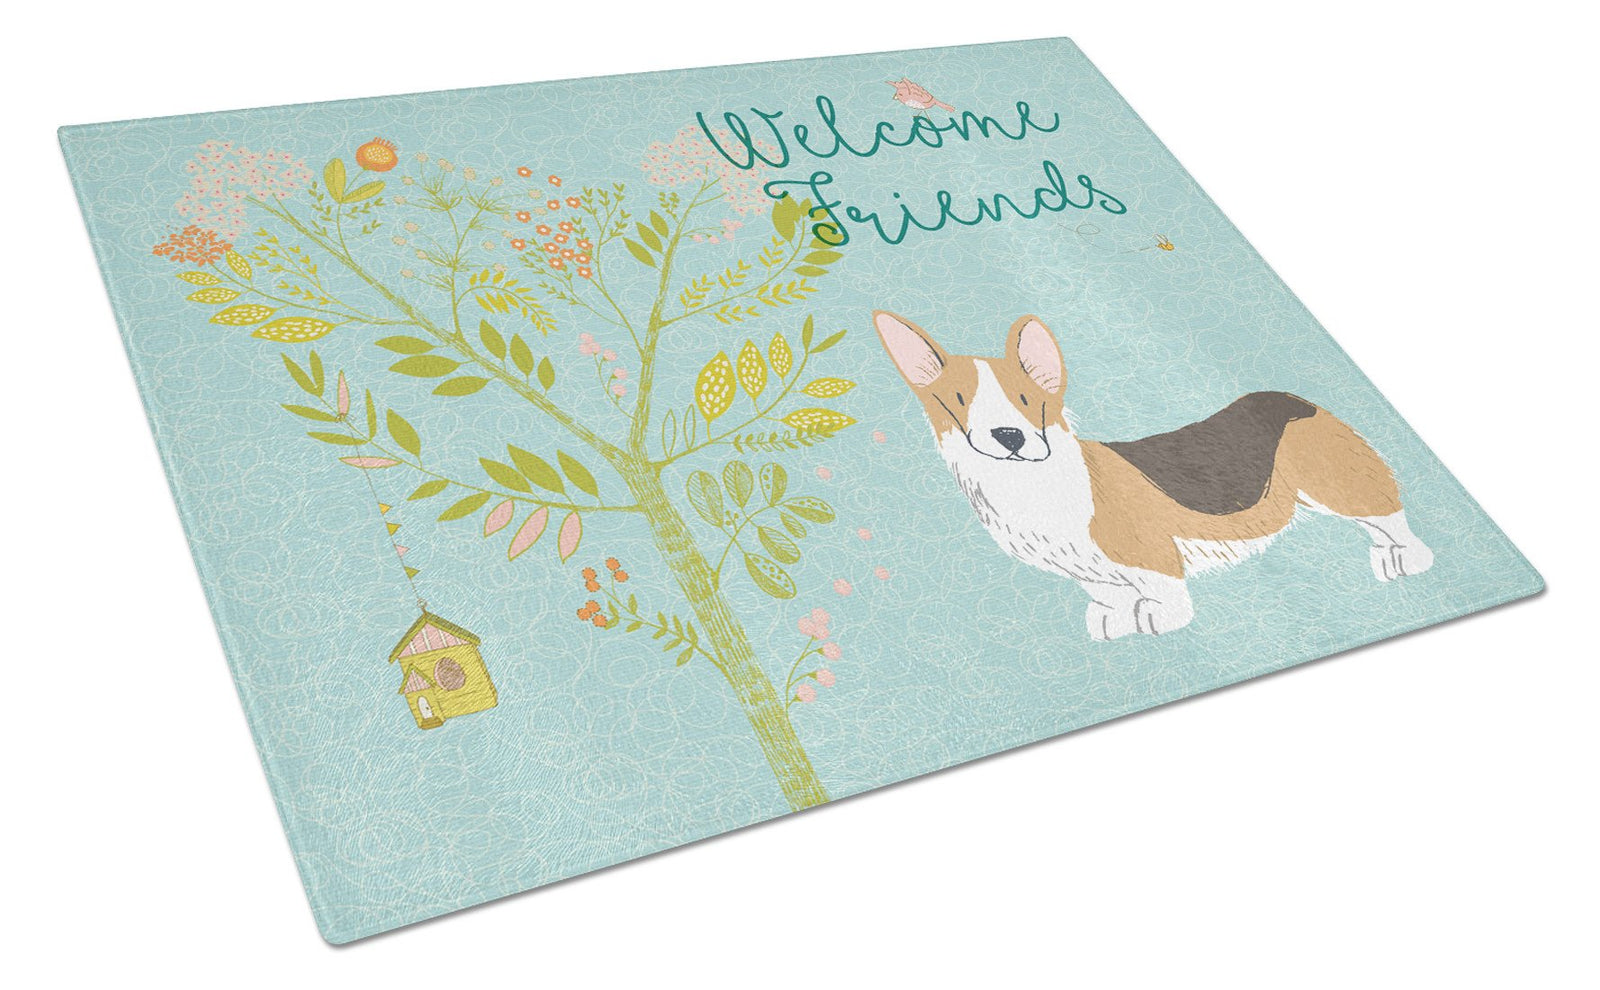 Welcome Friends Pembroke Welsh Corgi Tricolor Glass Cutting Board Large BB7609LCB by Caroline's Treasures